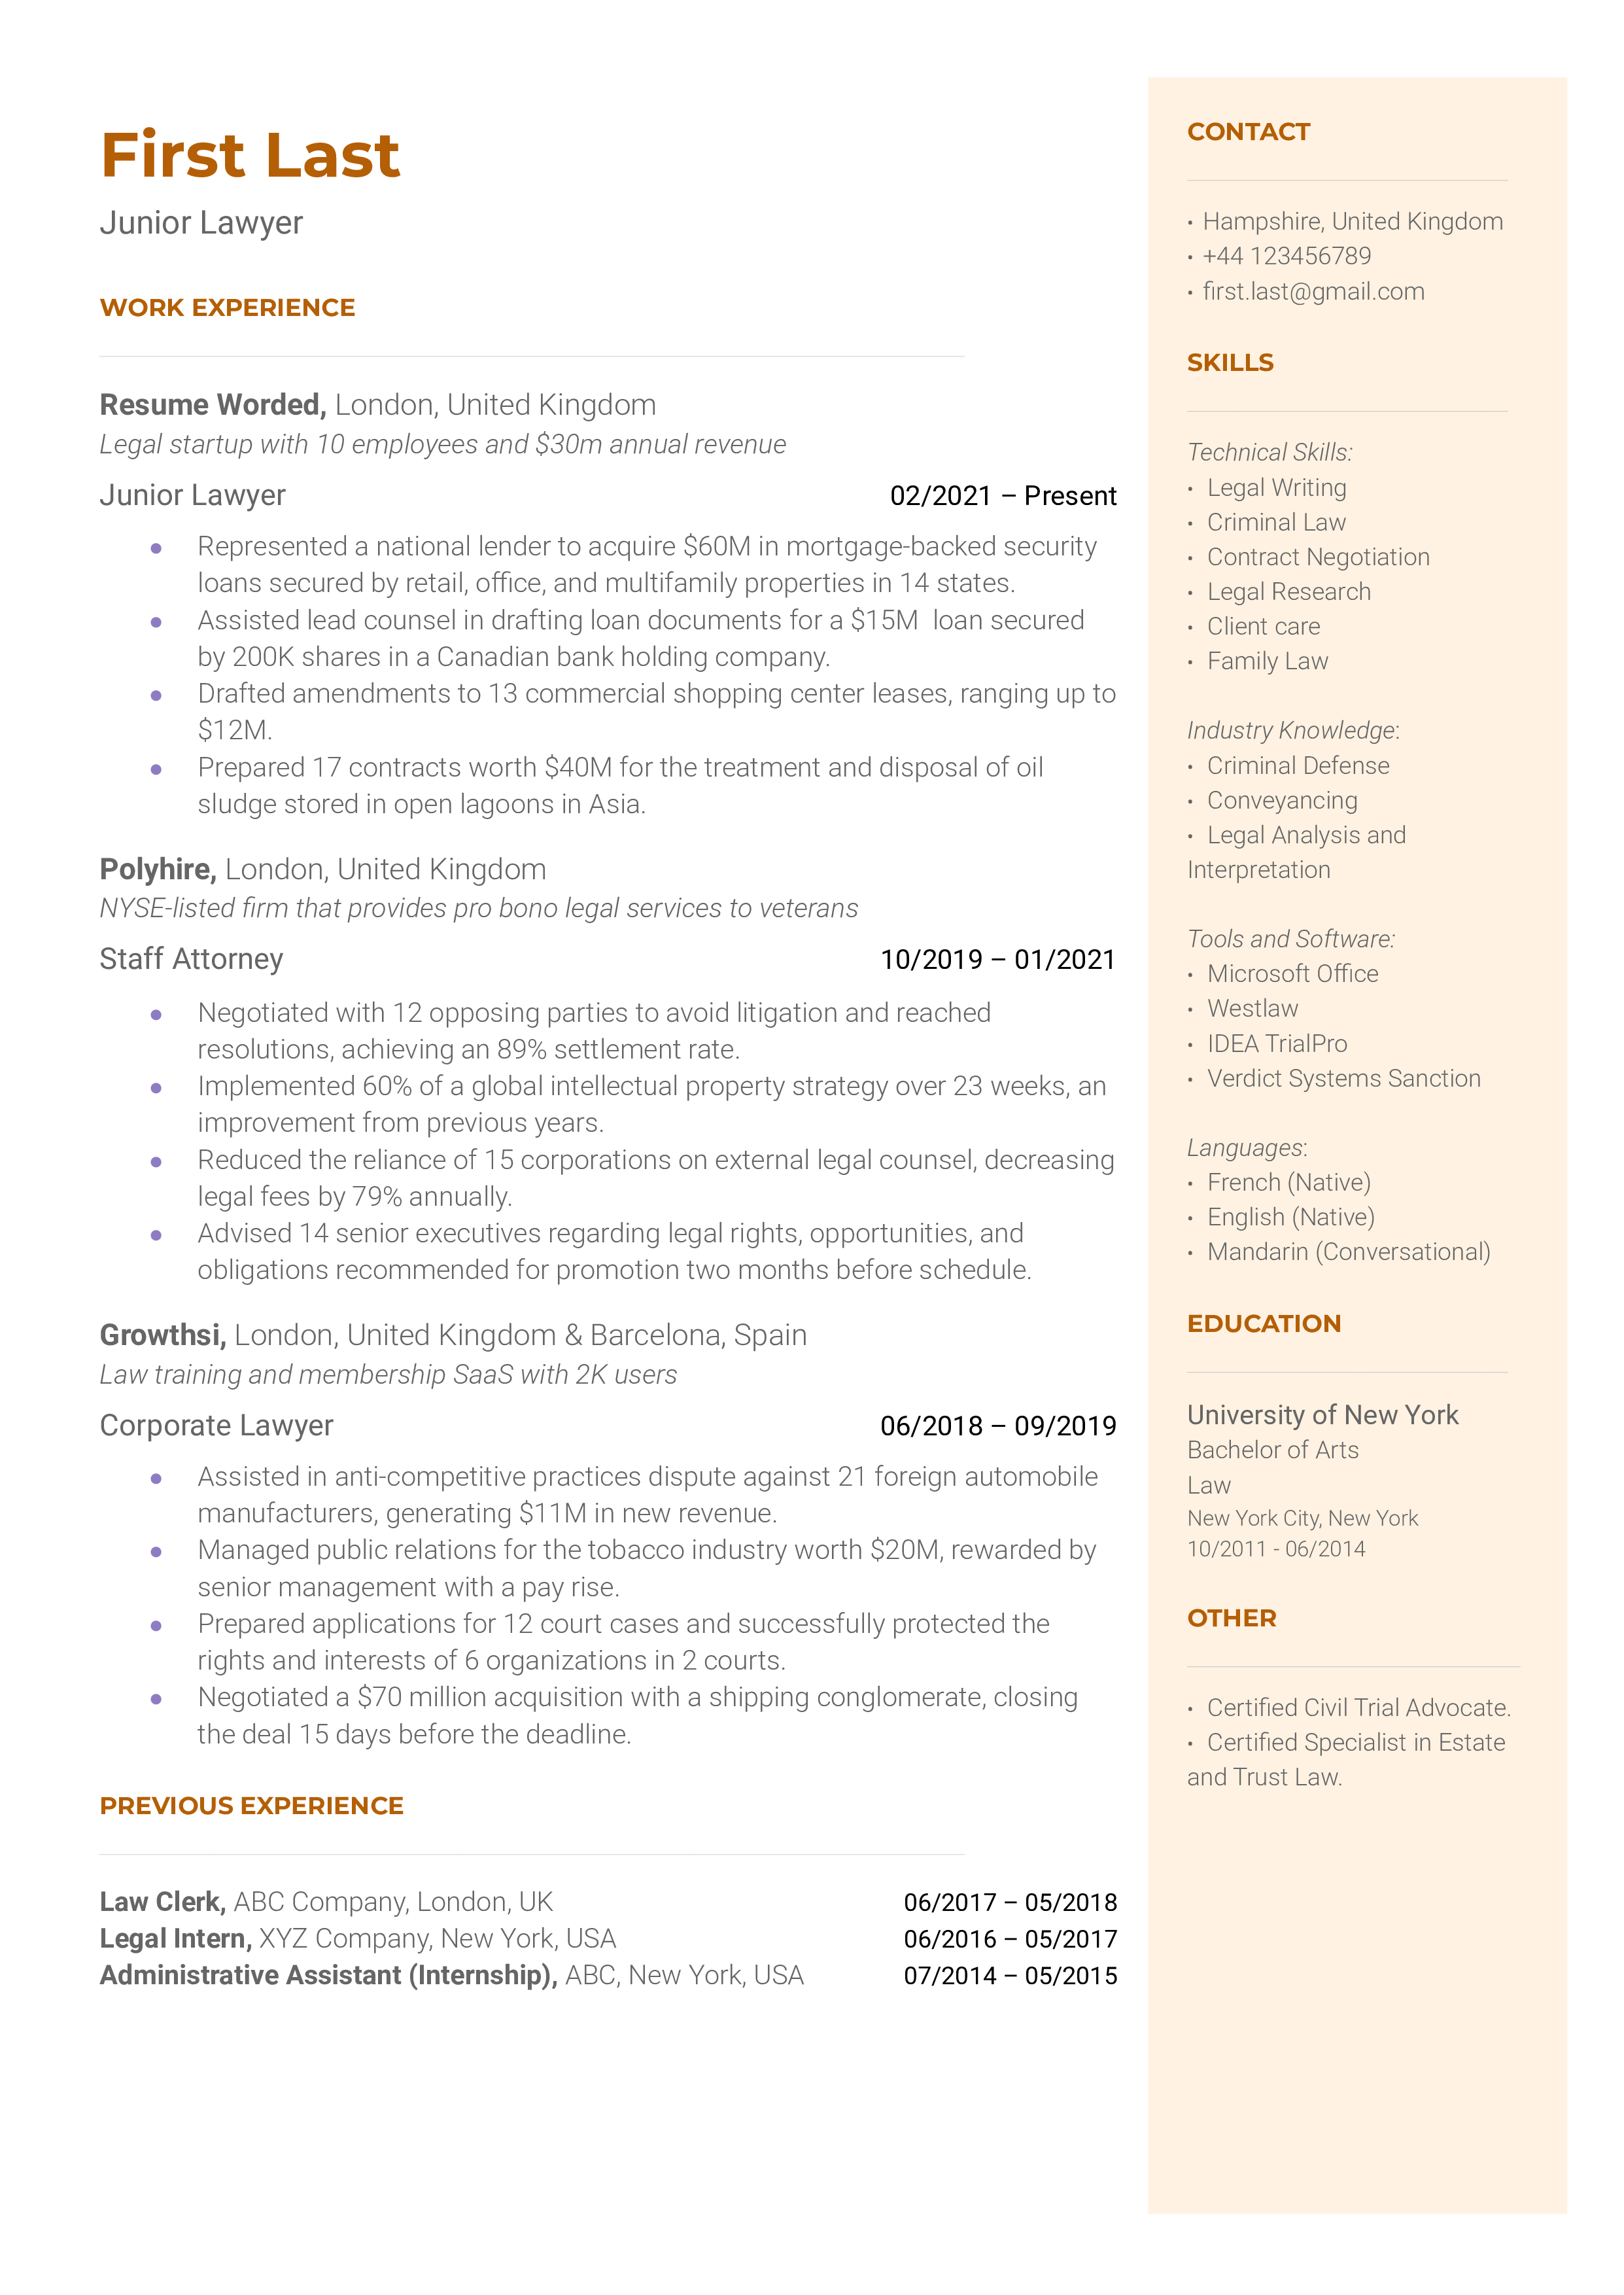 A junior lawyer resume sample that highlights the applicant’s certifications and range of skills.